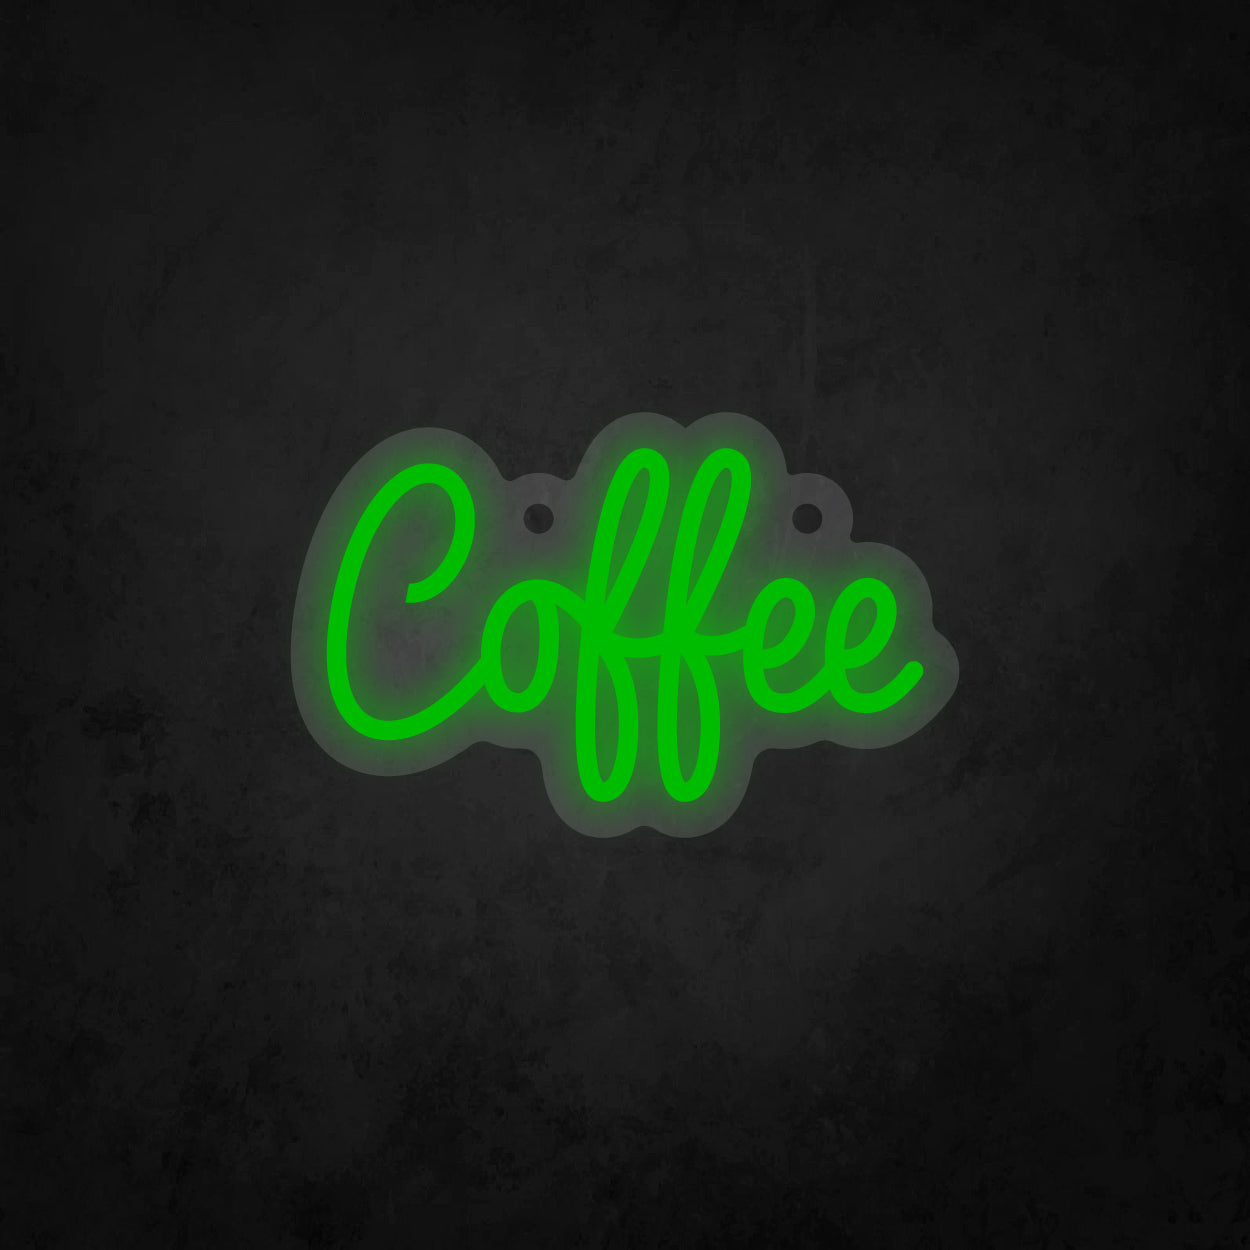 LED Neon Sign - Coffee Sign for Window